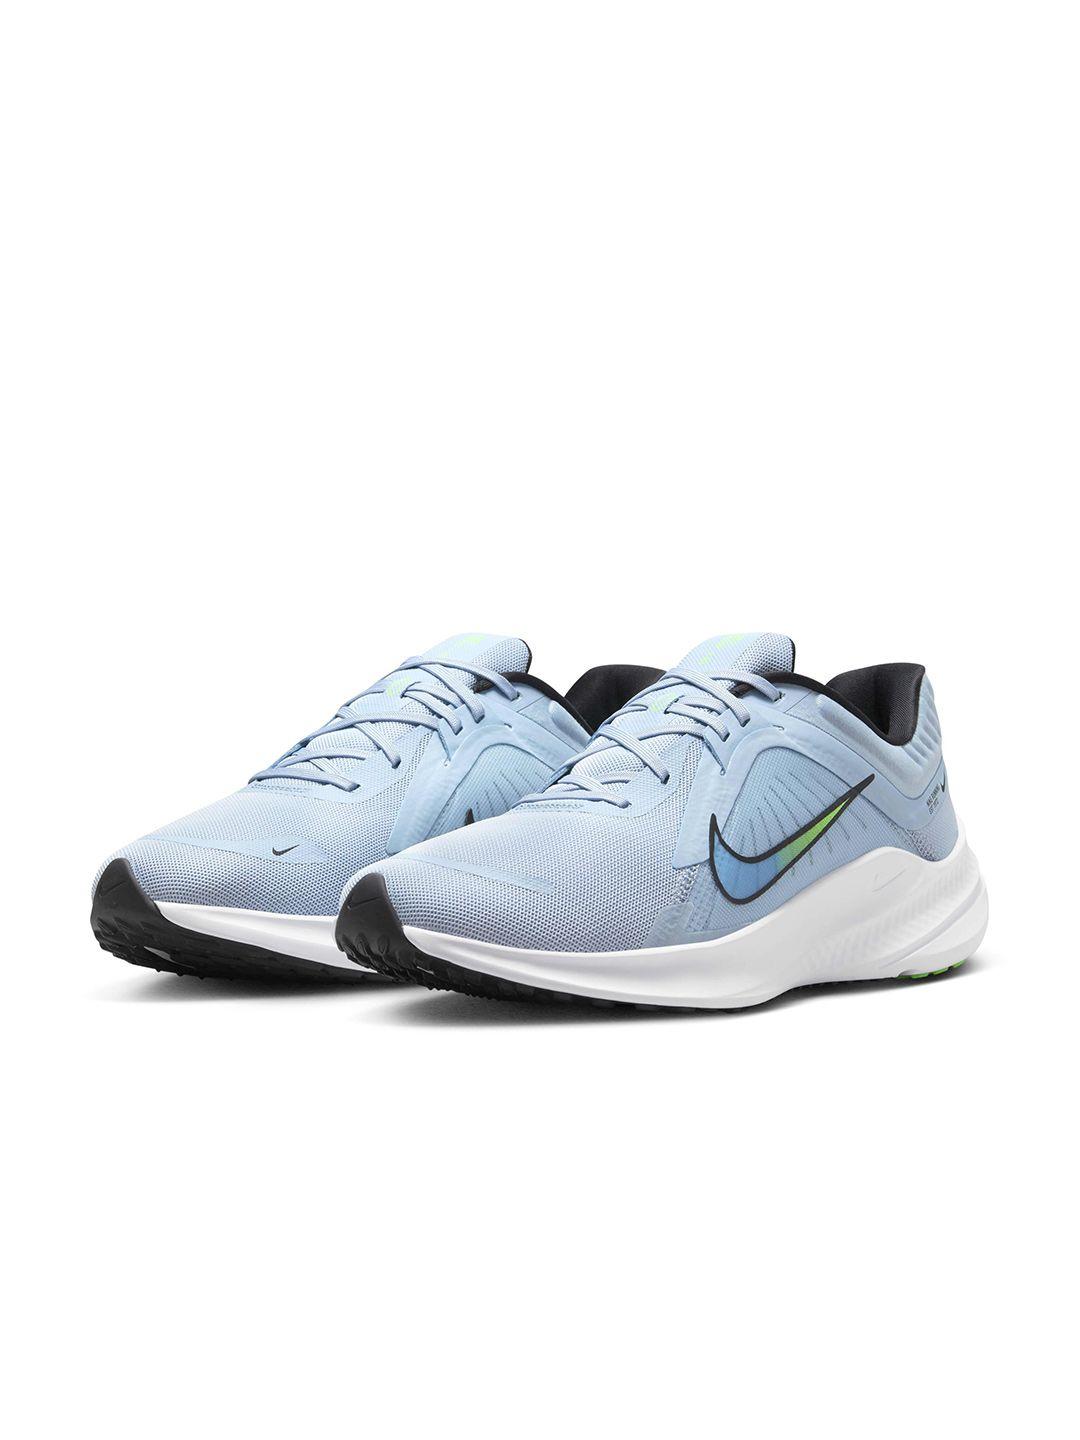 nike-men-quest-5-road-running-shoes